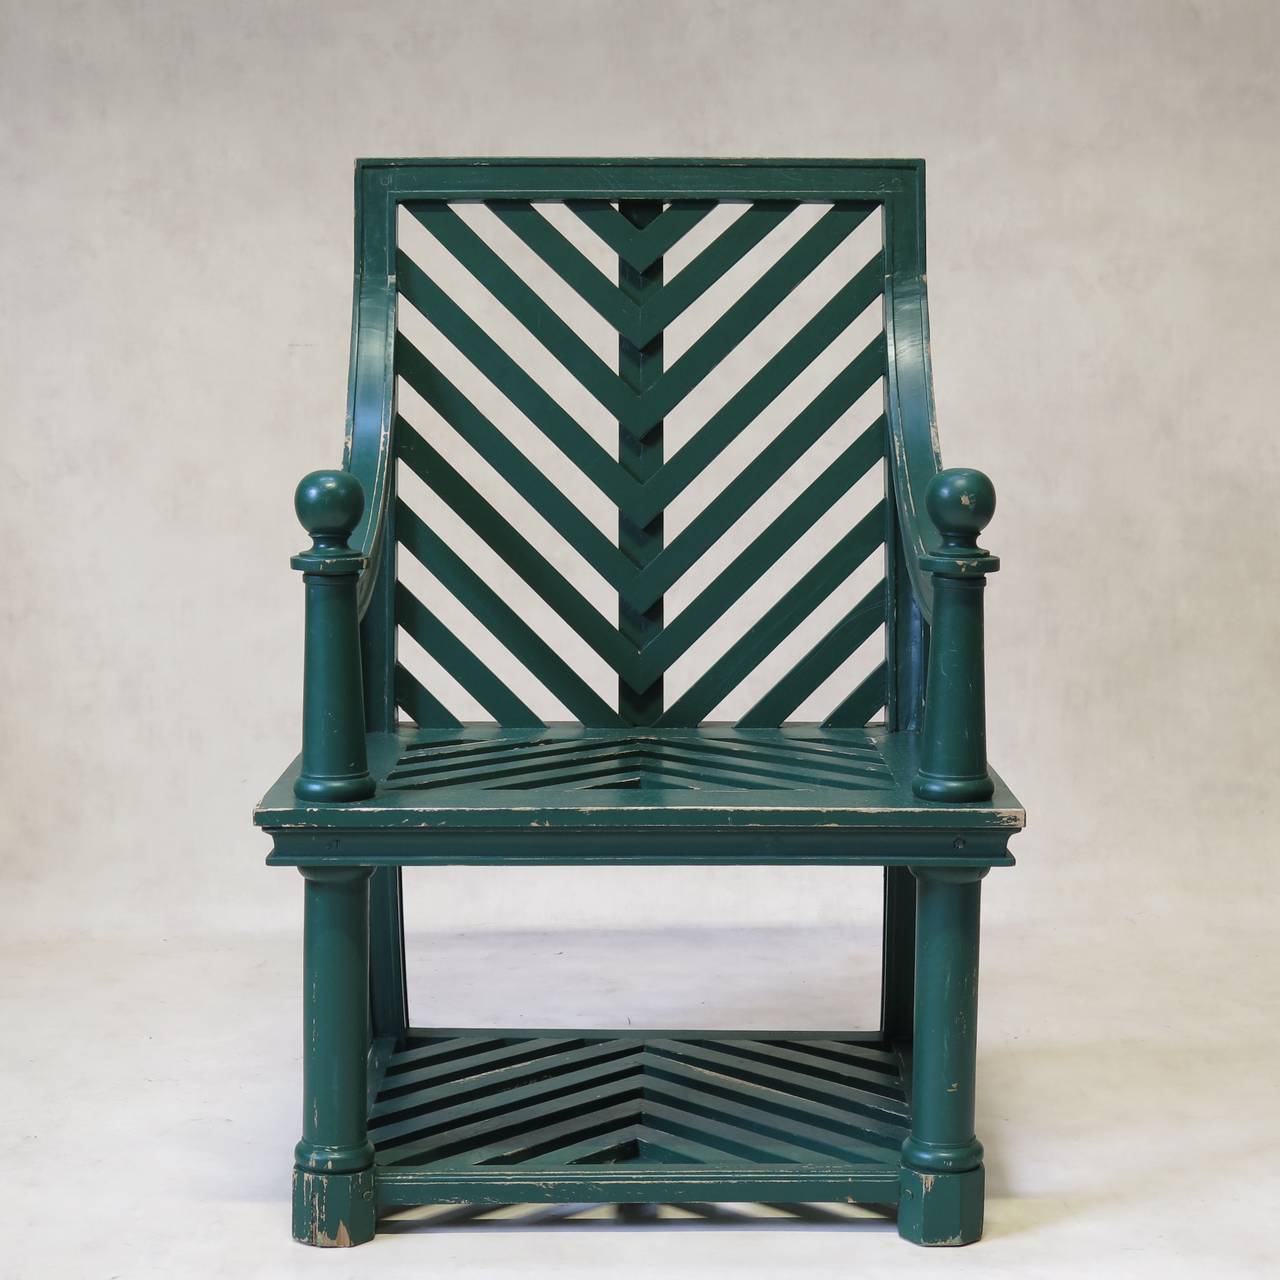 Wonderful pair of solid green-laquered garden chairs attributed to Emilio Terry. Herring-bone pattern; armrests ending topped with large spheres; cylindrical front legs ending in facteted feet; sabre back legs.